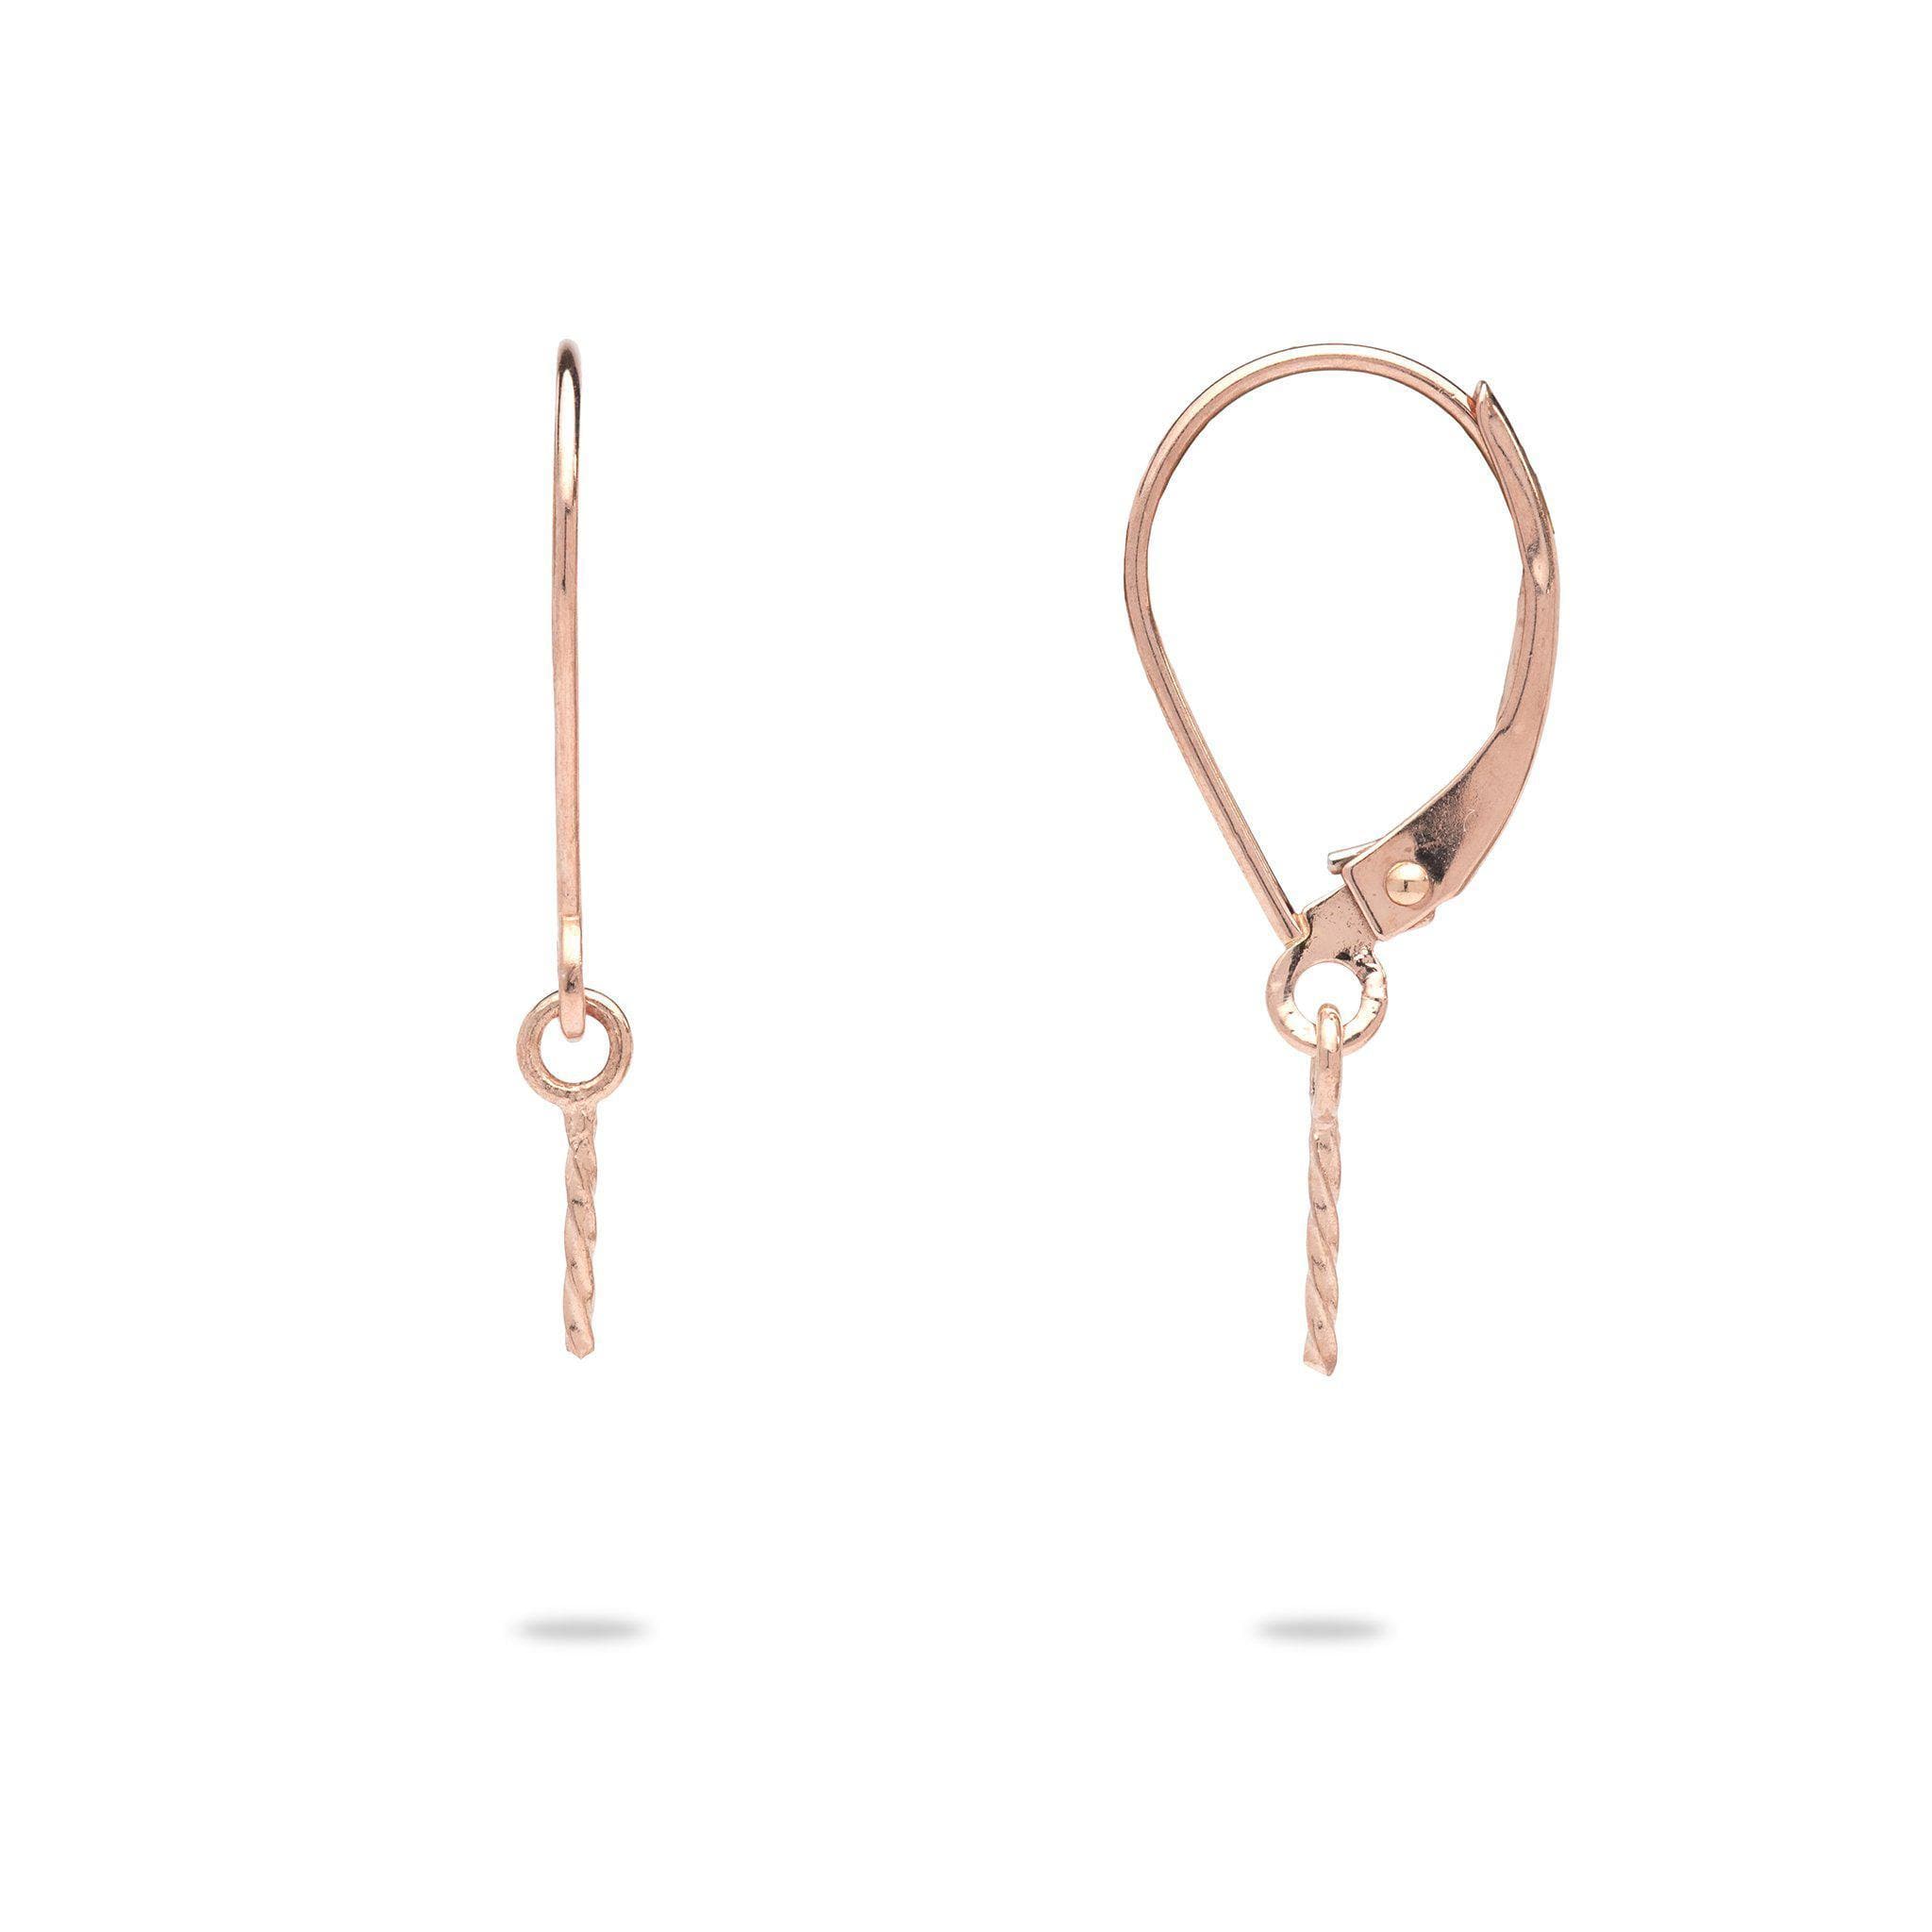 Leverback Earring Mountings in 14k Rose Gold - Maui Divers Jewelry